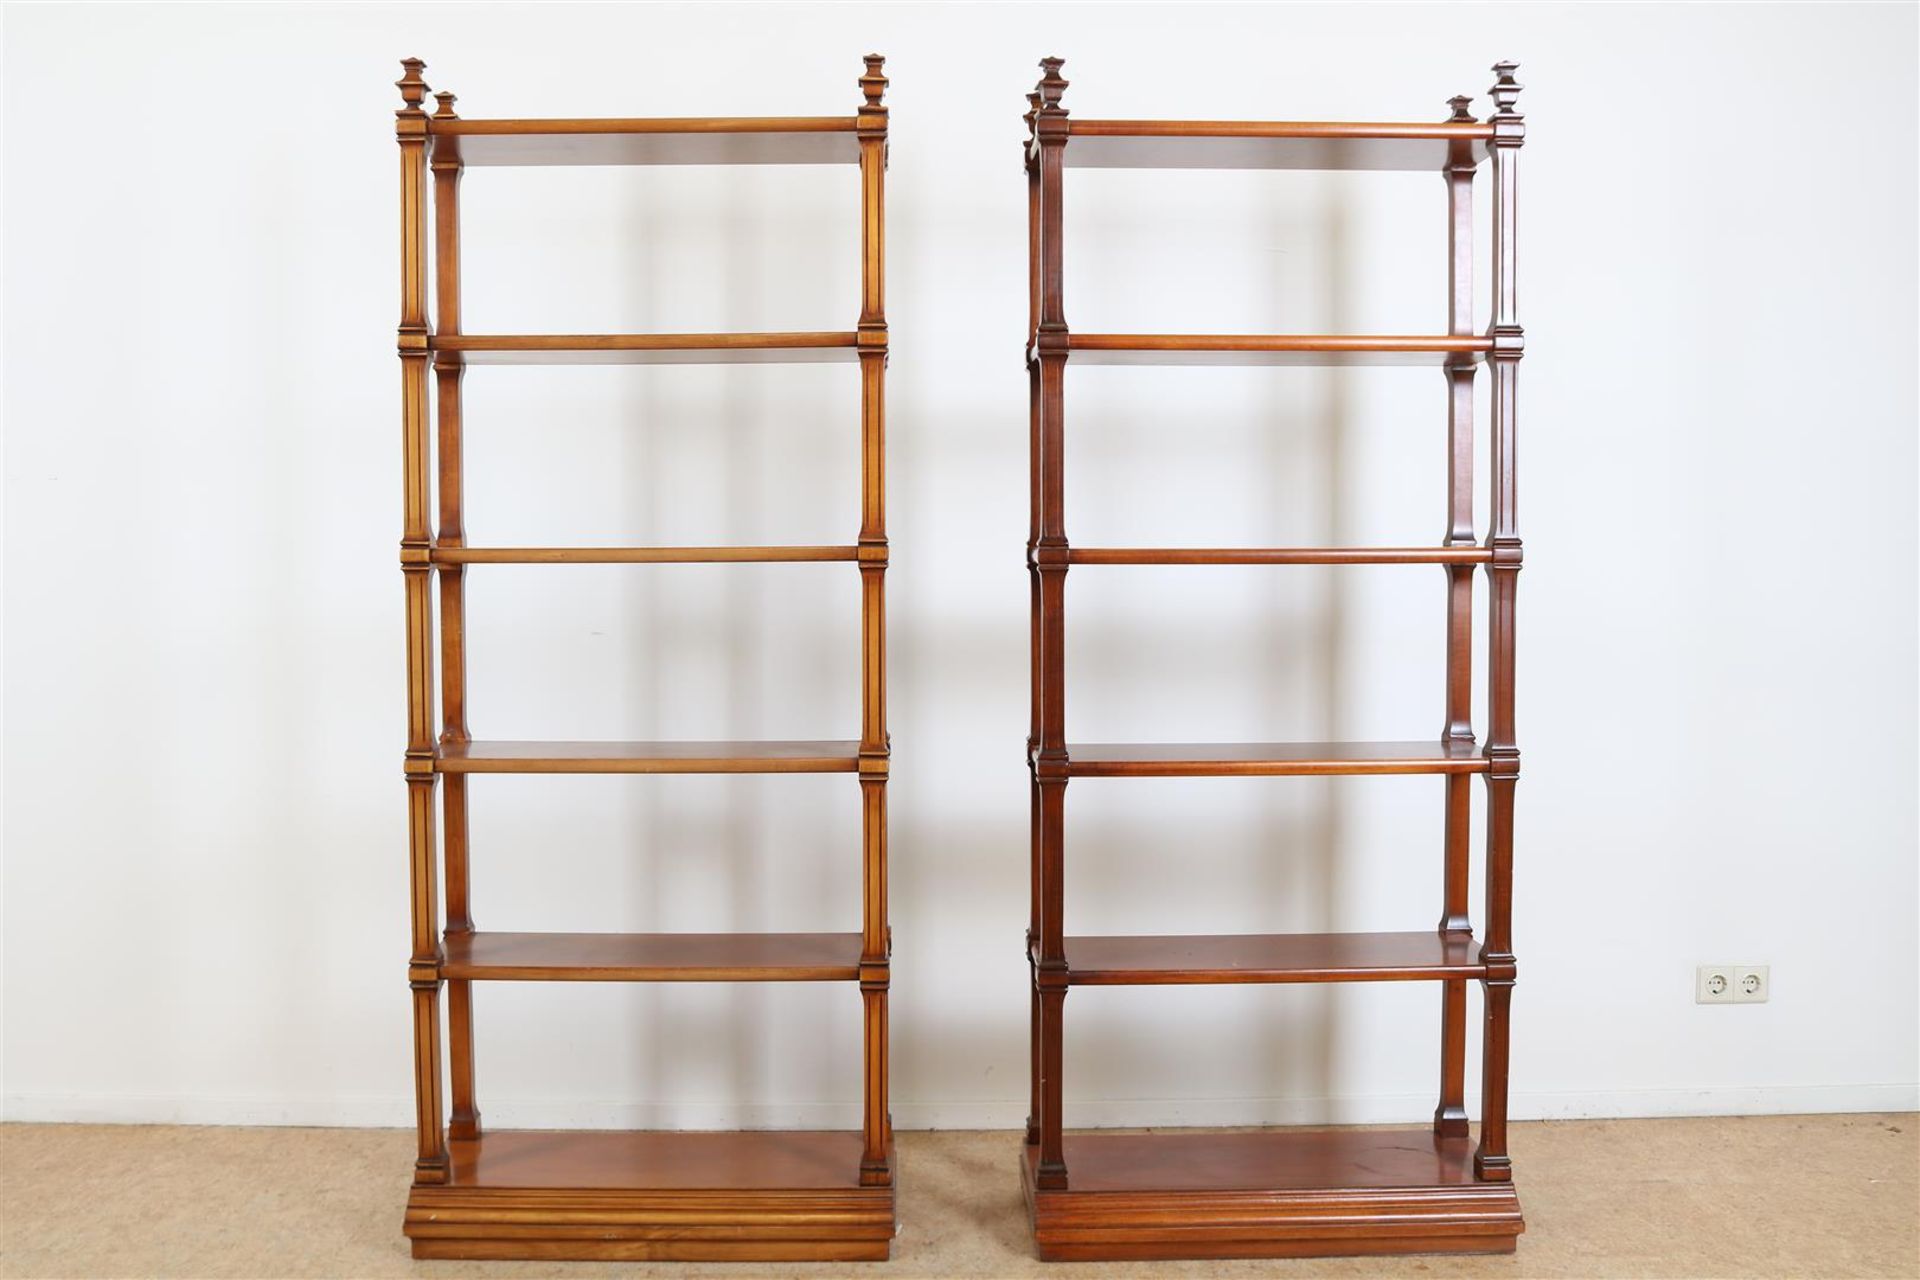 Set of cherry wood colored open shelf cabinets with 6 shelves, h. 198, w. 80, d. 30 cm.